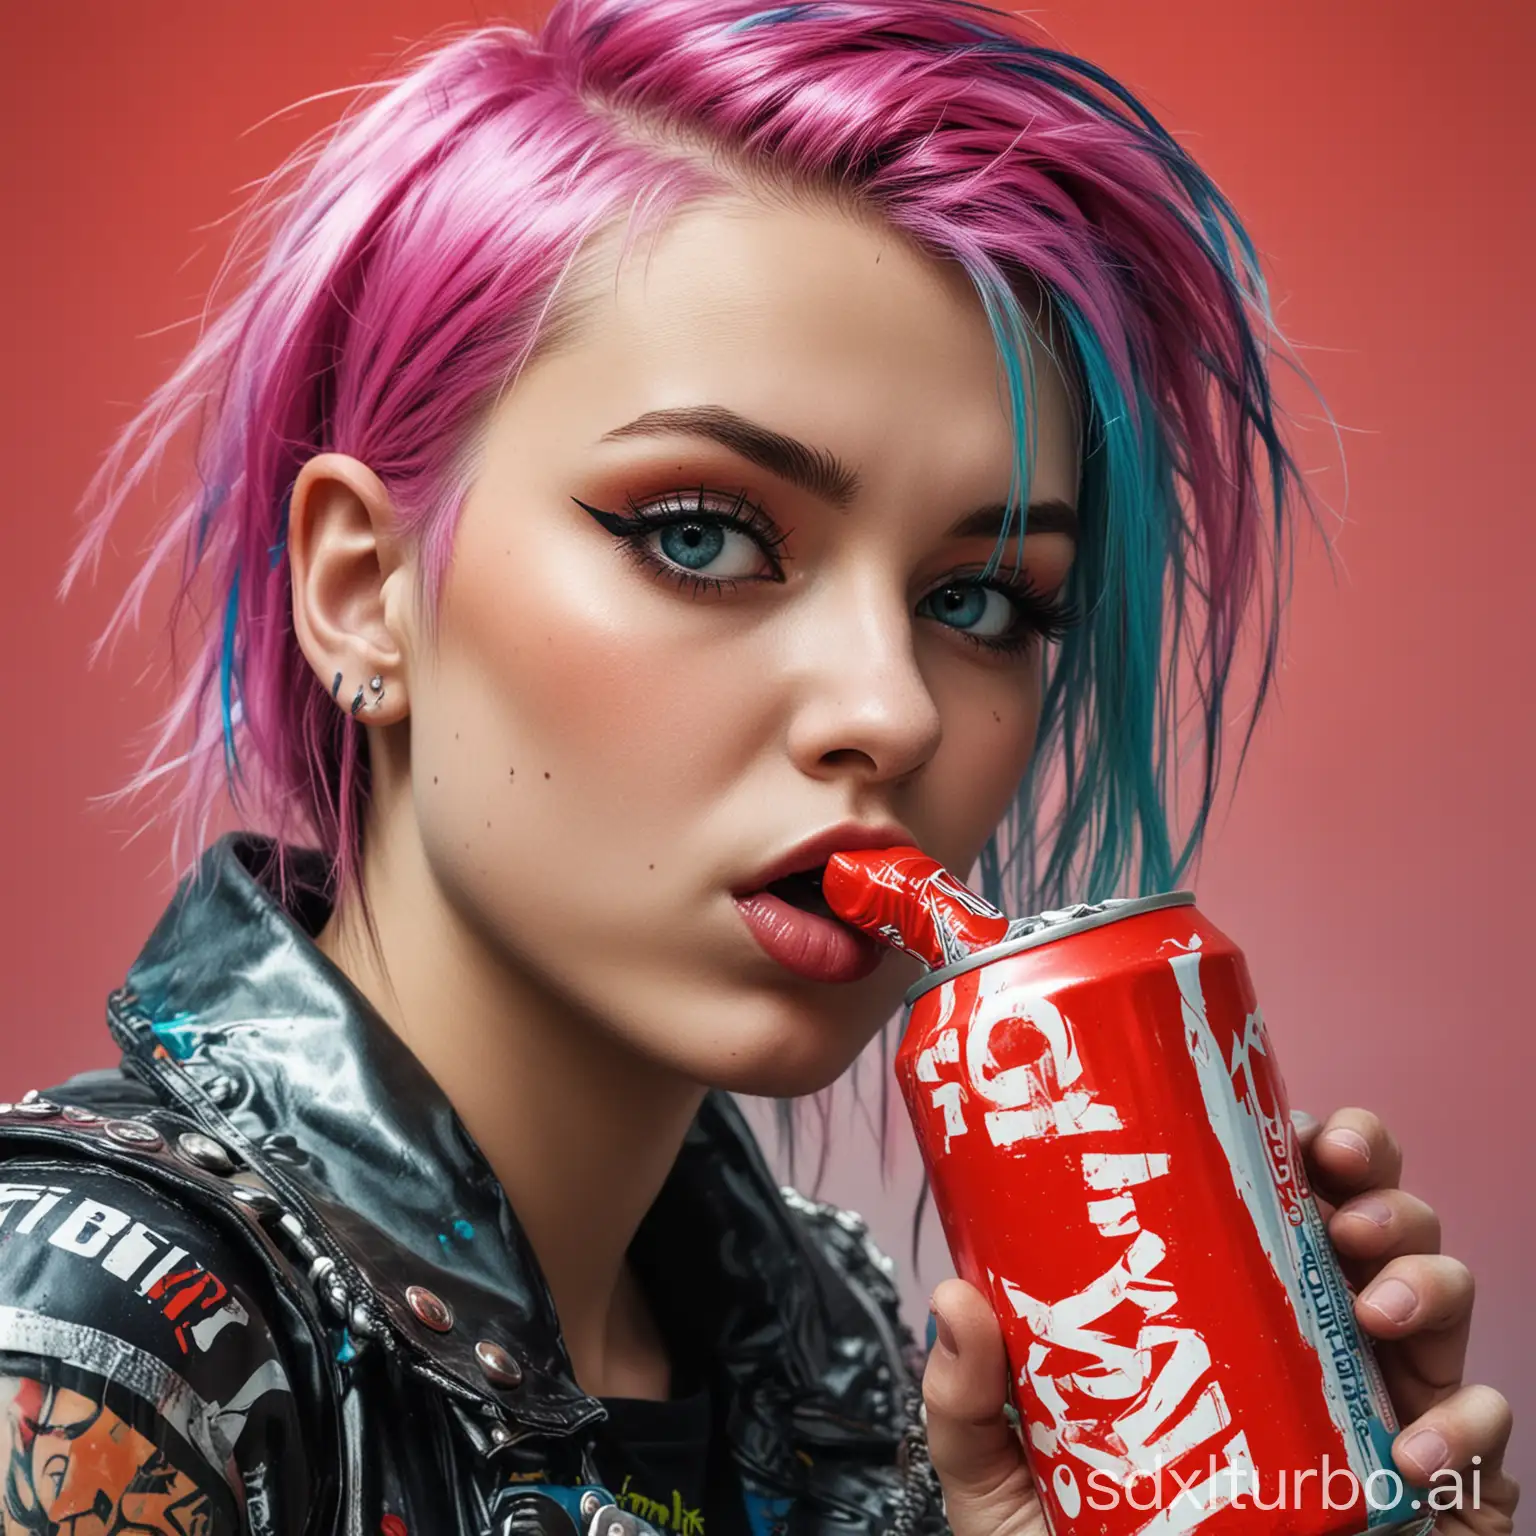 polish punkgirl drinking from soda can, super duper colors